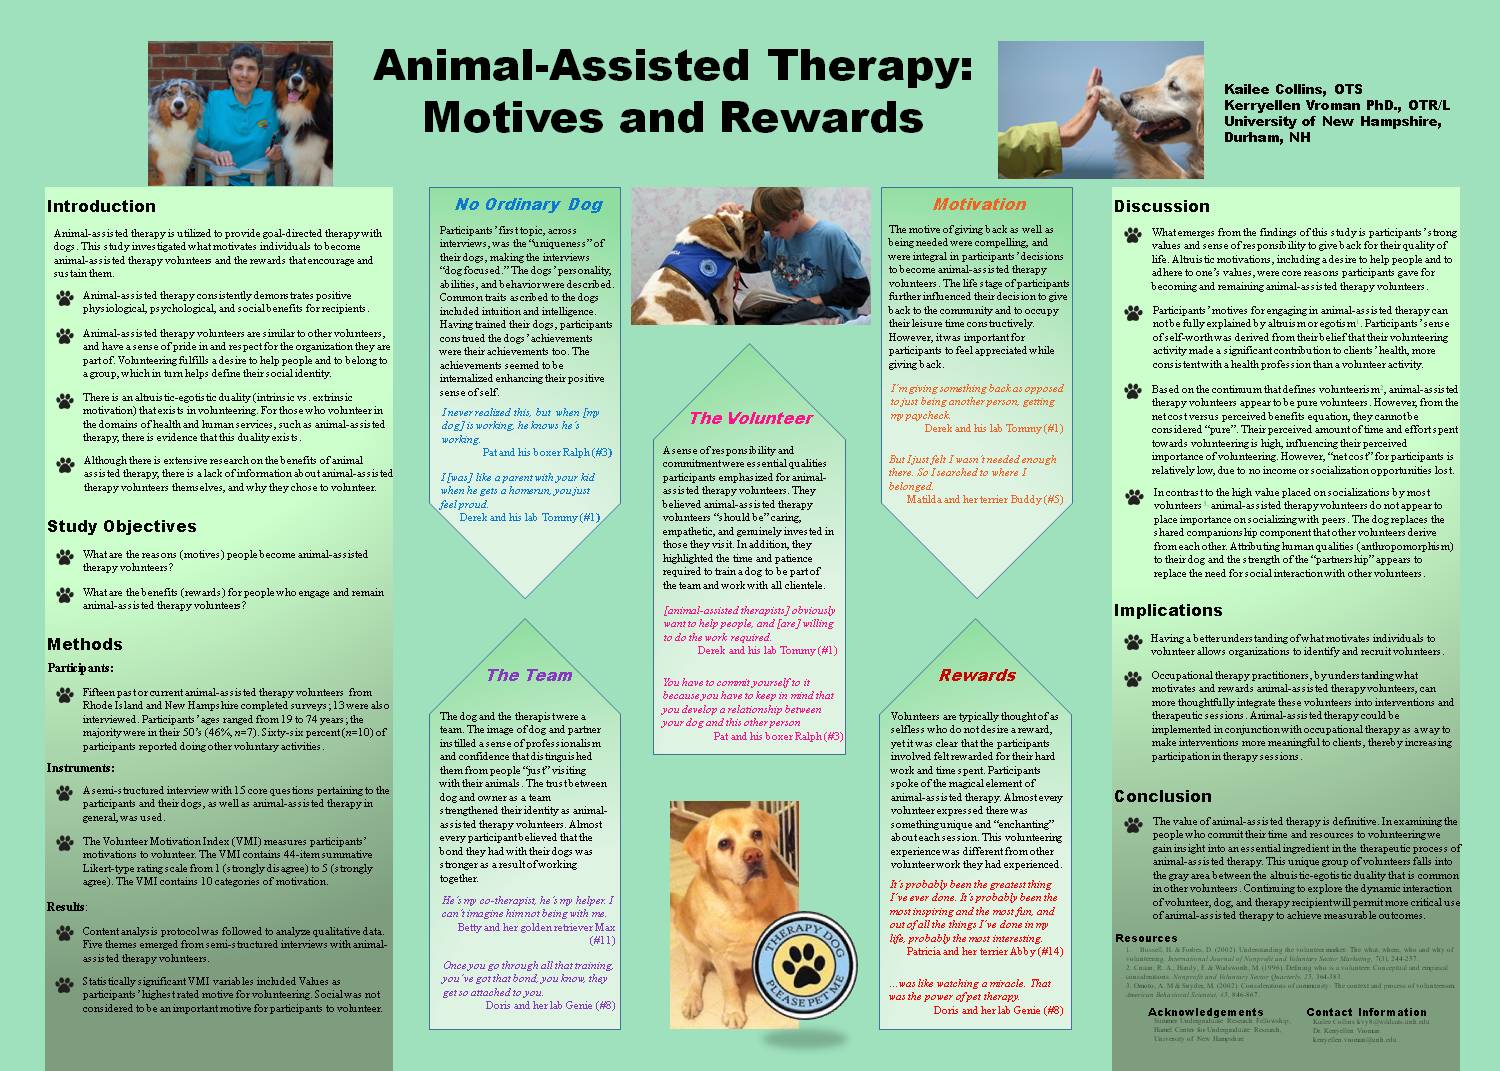 Animal-Assisted Therapy: Motives And Rewards by Kailee